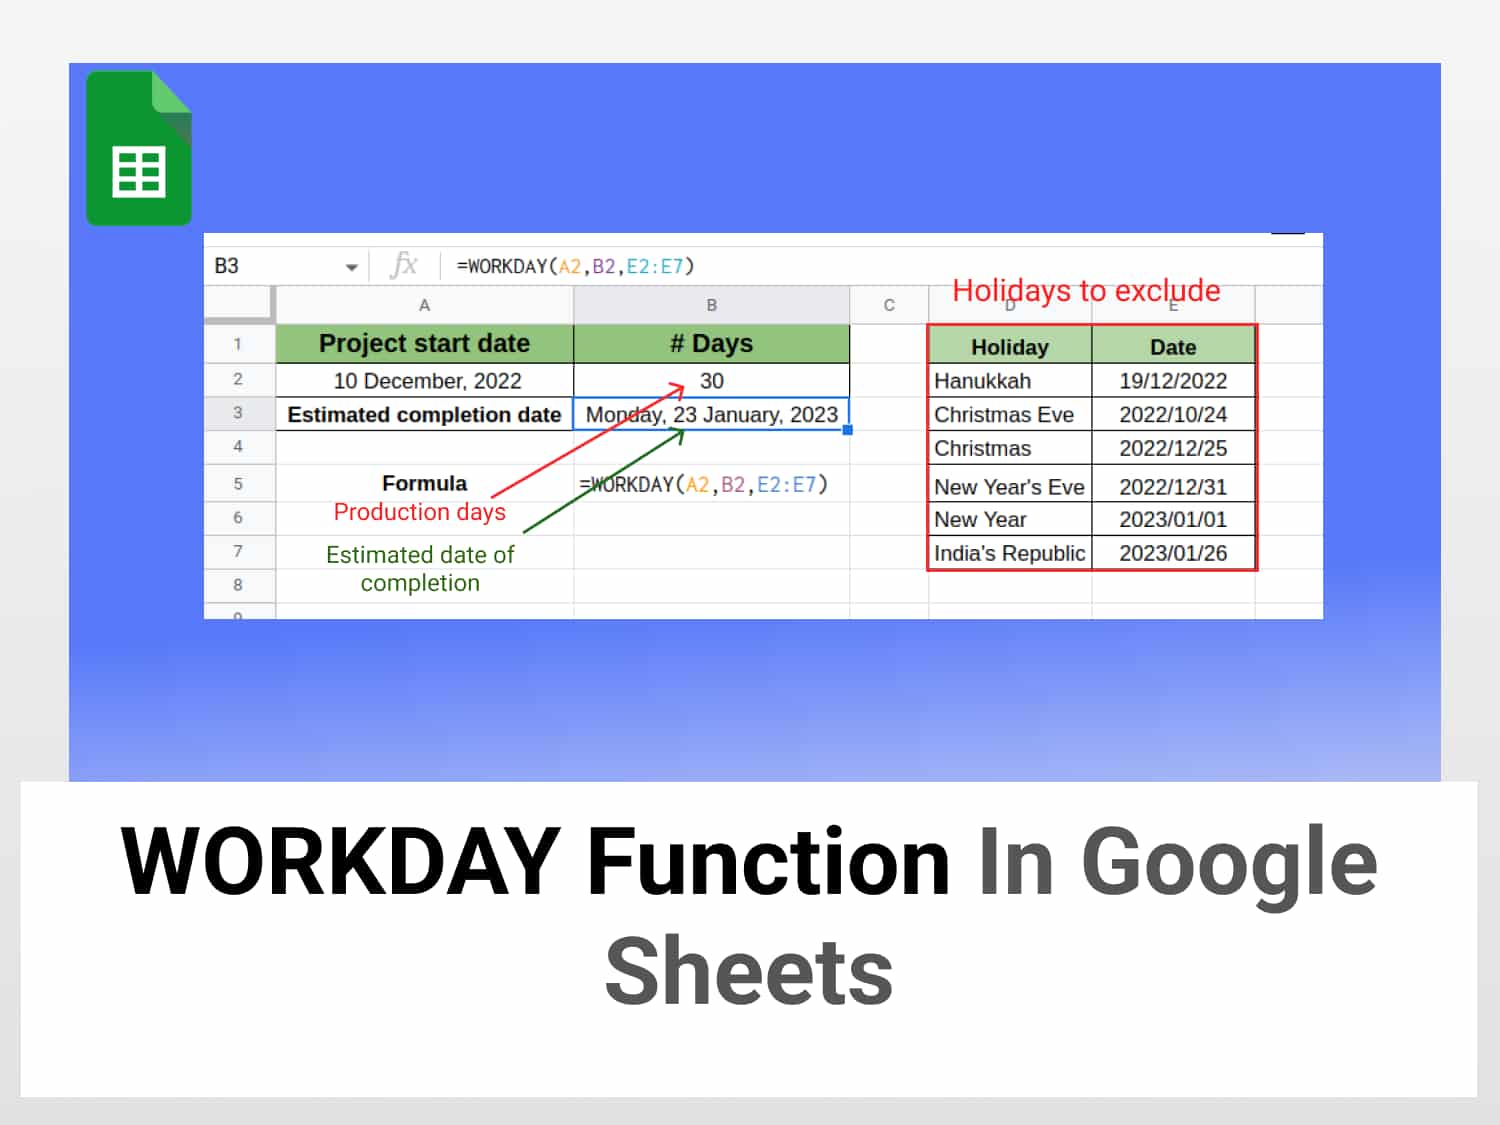 WORKDAY function in Google Sheets